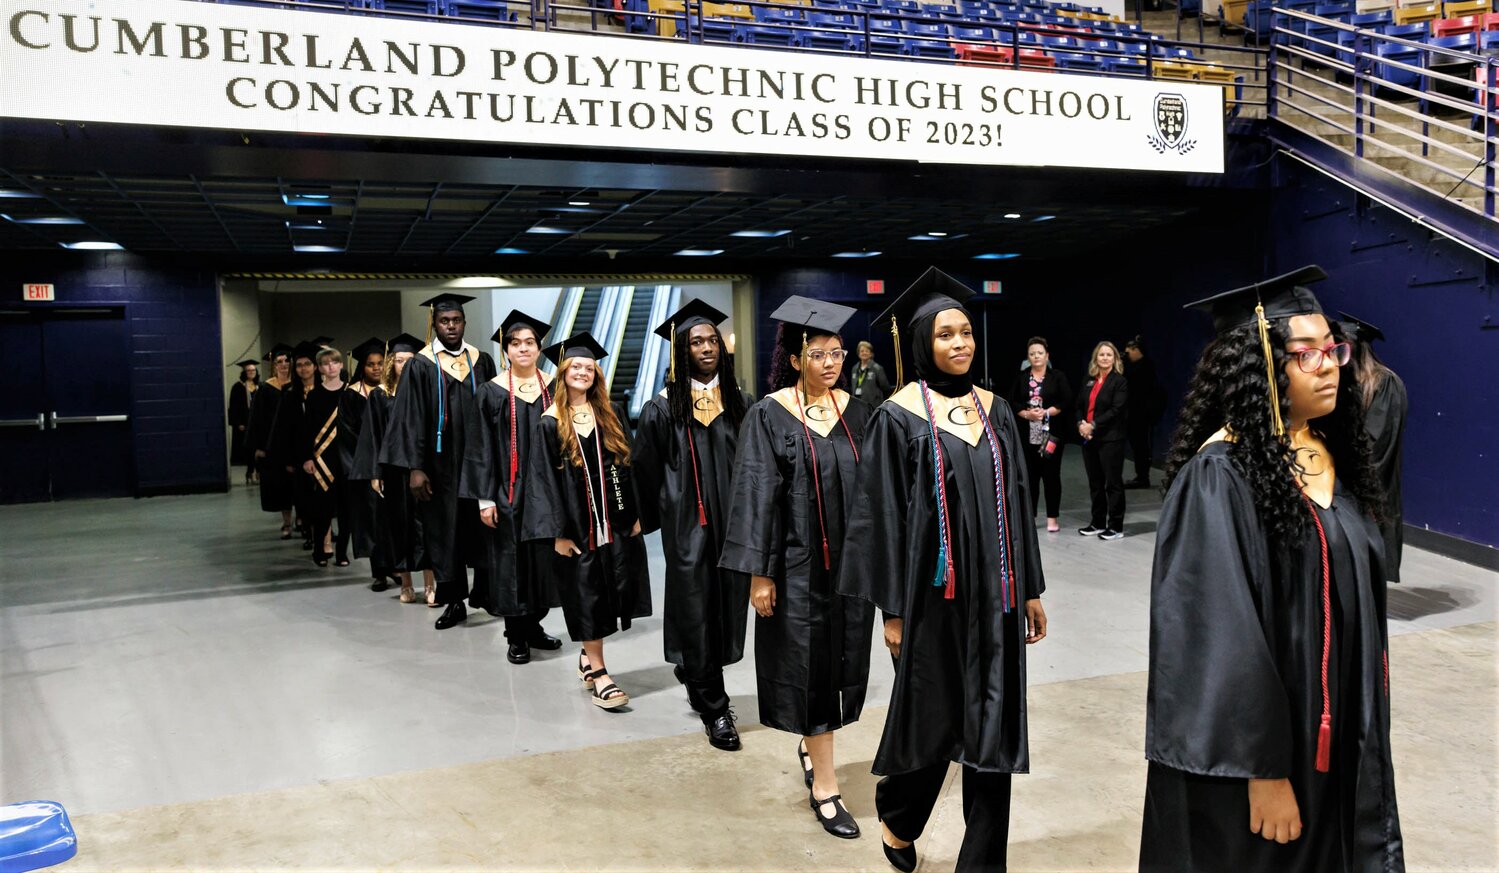 Cumberland Polytechnic High School students enter the graduation exercises Thursday at the Crown Coliseum.